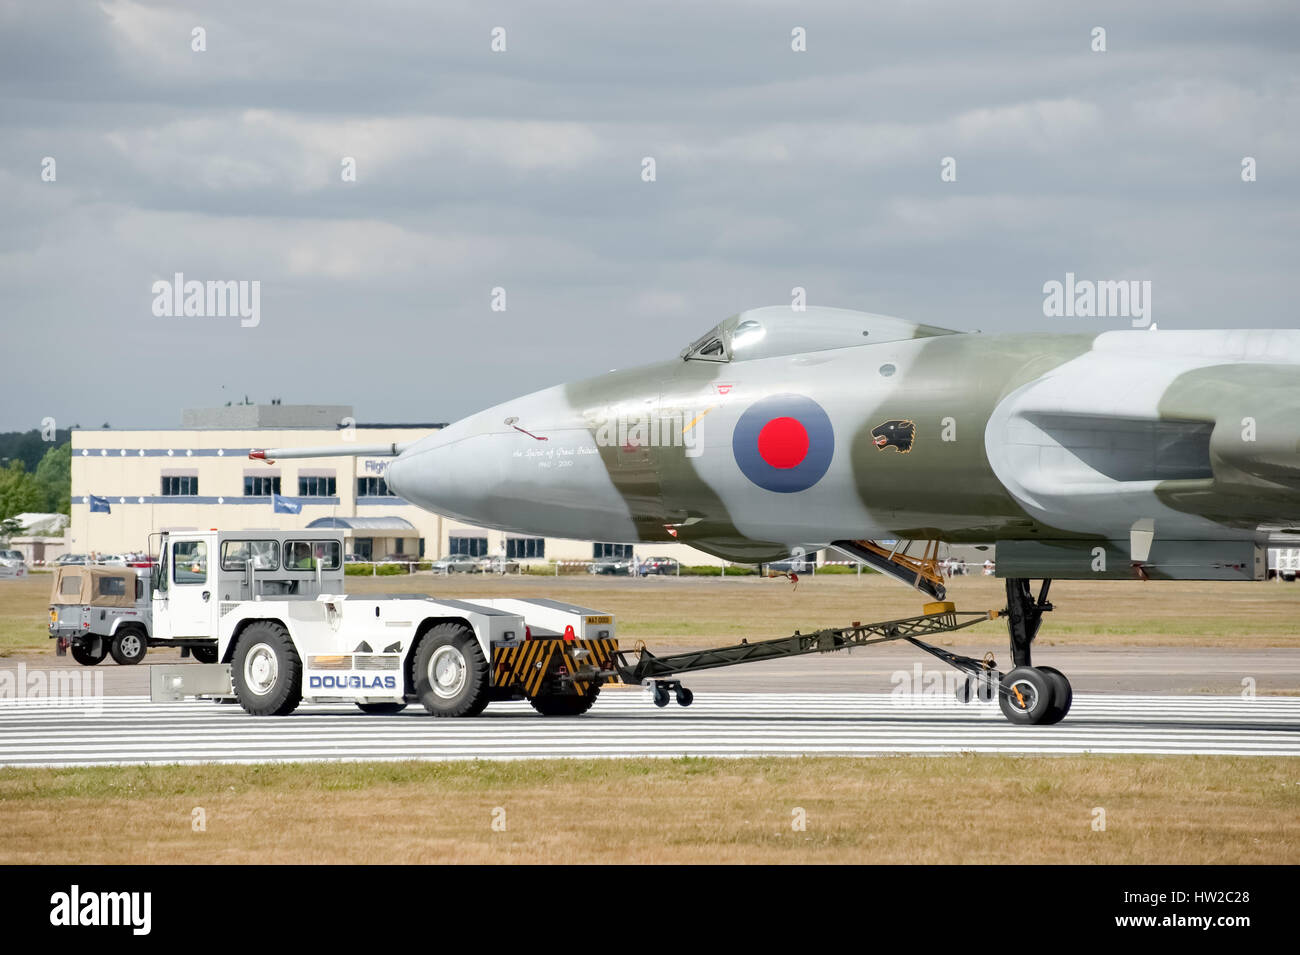 Vulcan bomber XH558 being towed by an airfield tug truck at the Farnborough Airshow, UK Stock Photo